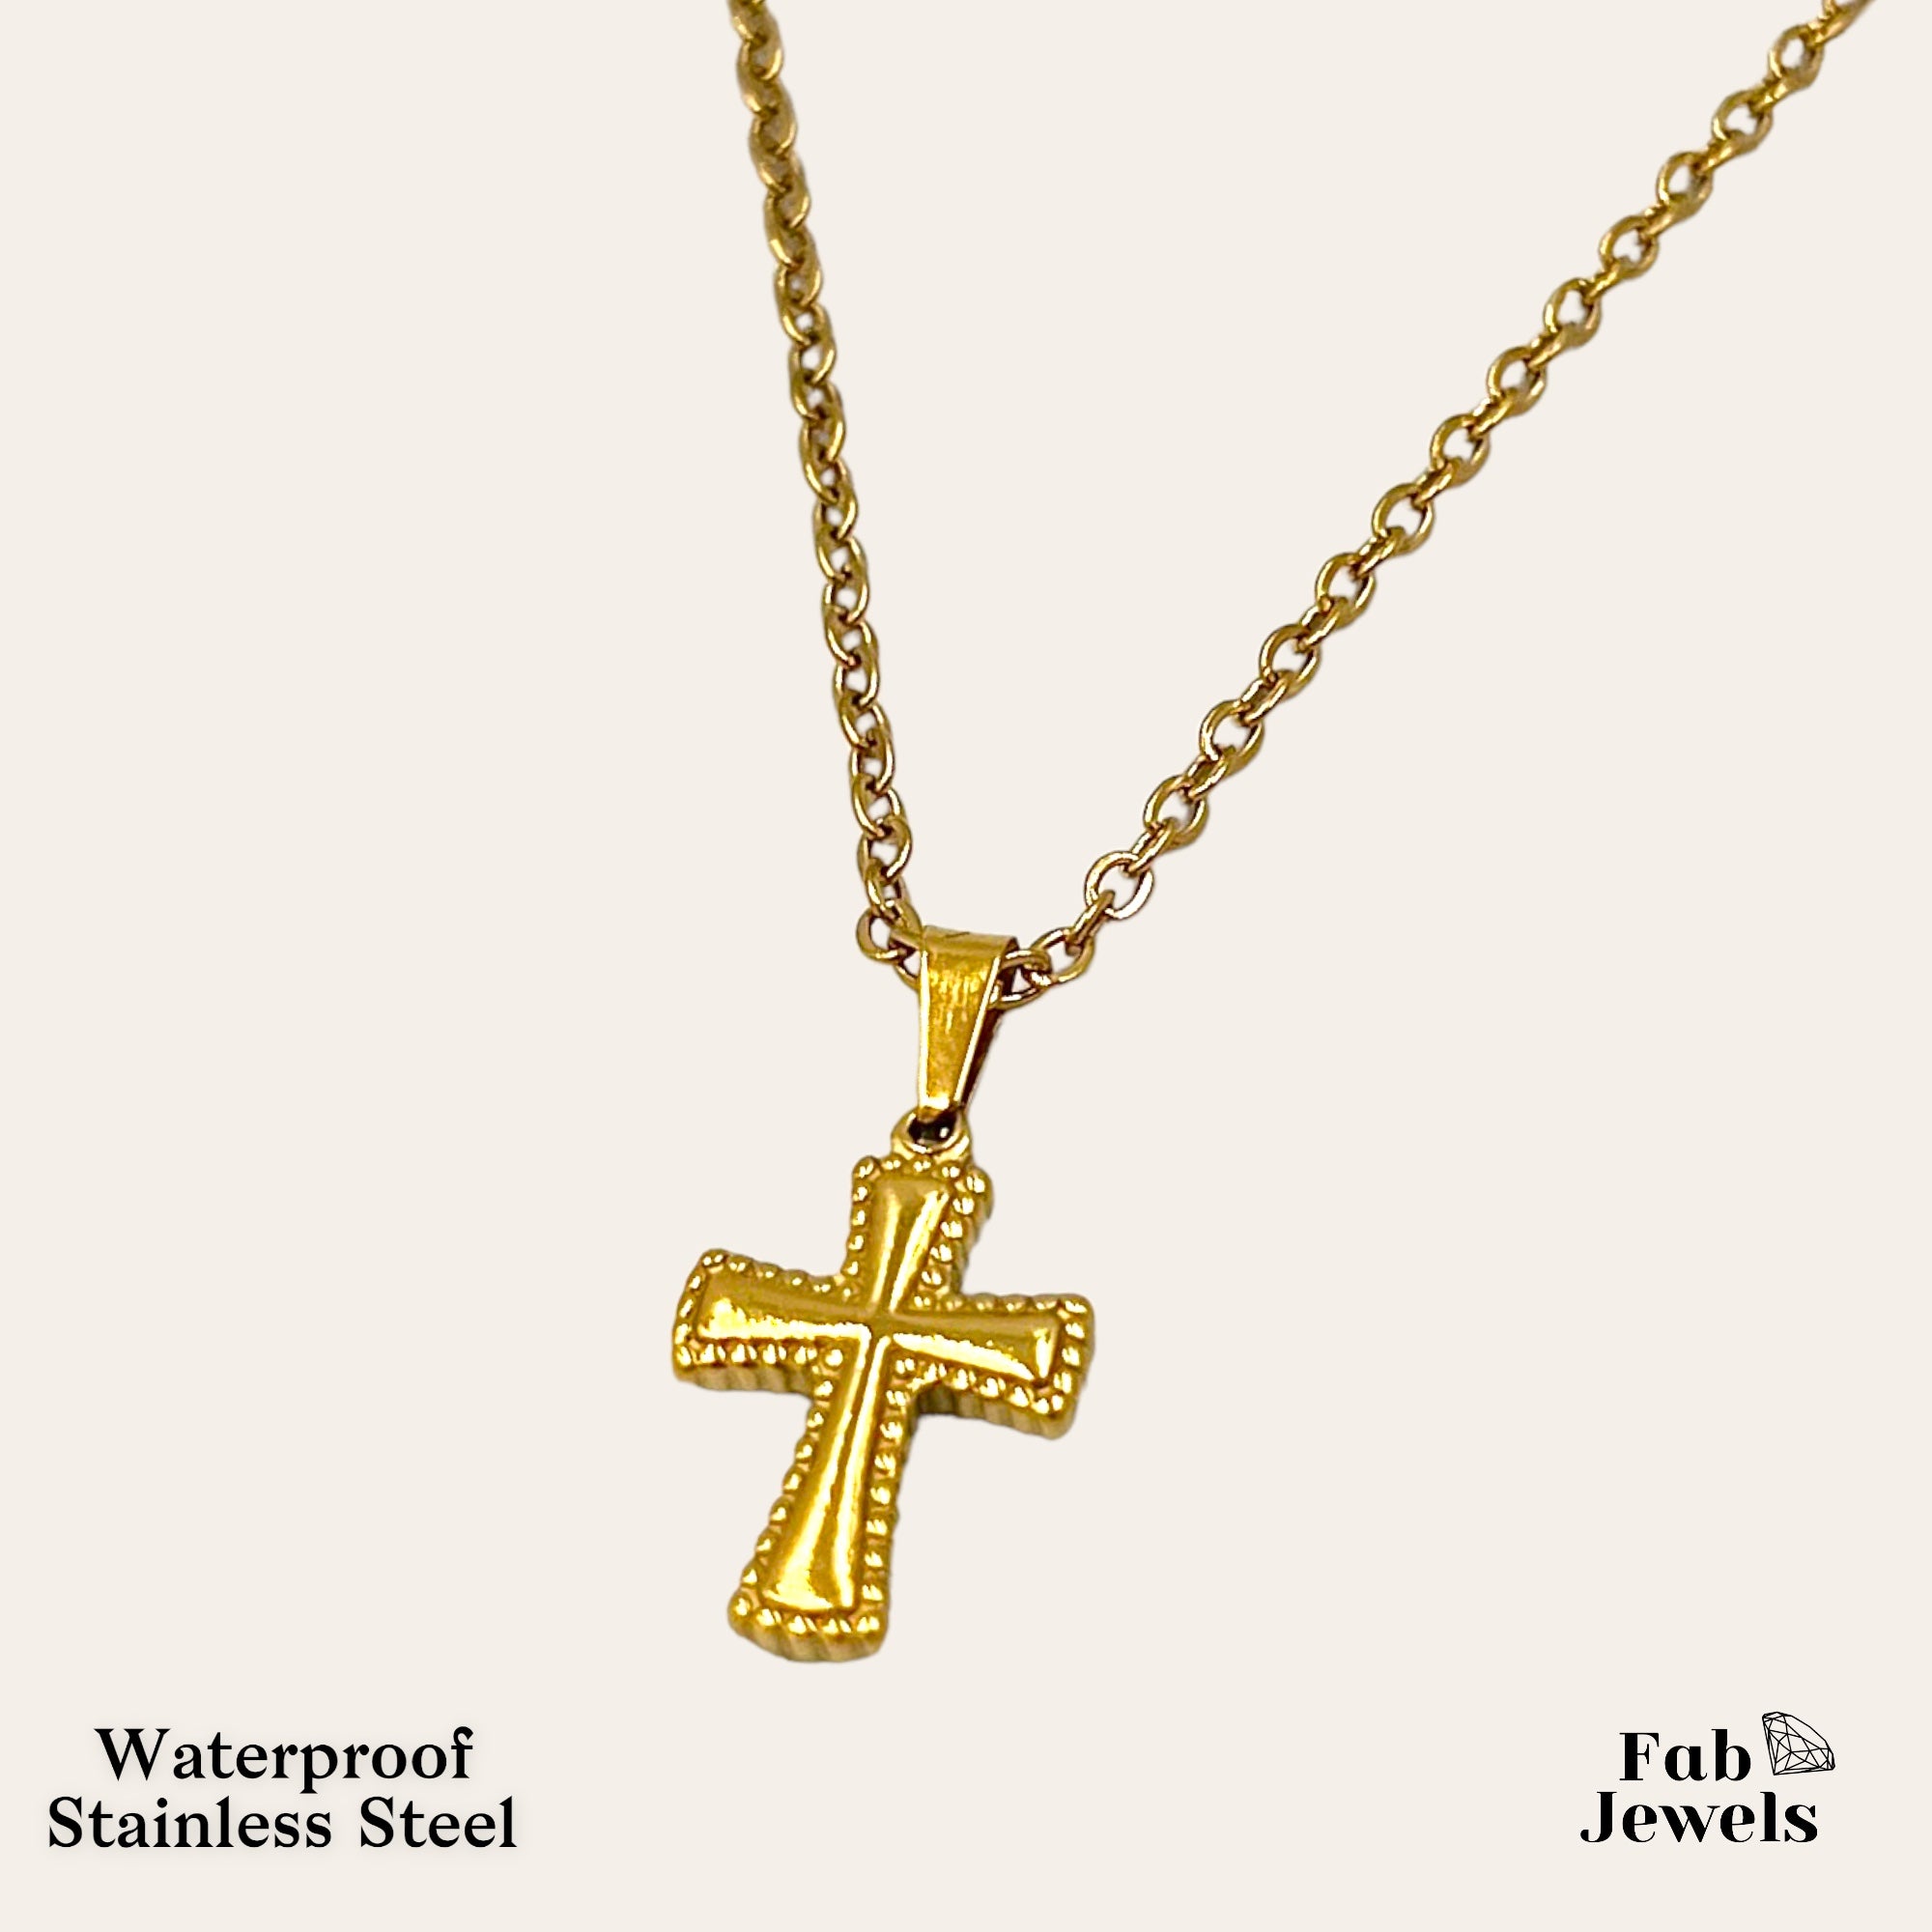 Belcher Chain With Skull Cross Pendant - Gold Plated on 925 Sterling Silver